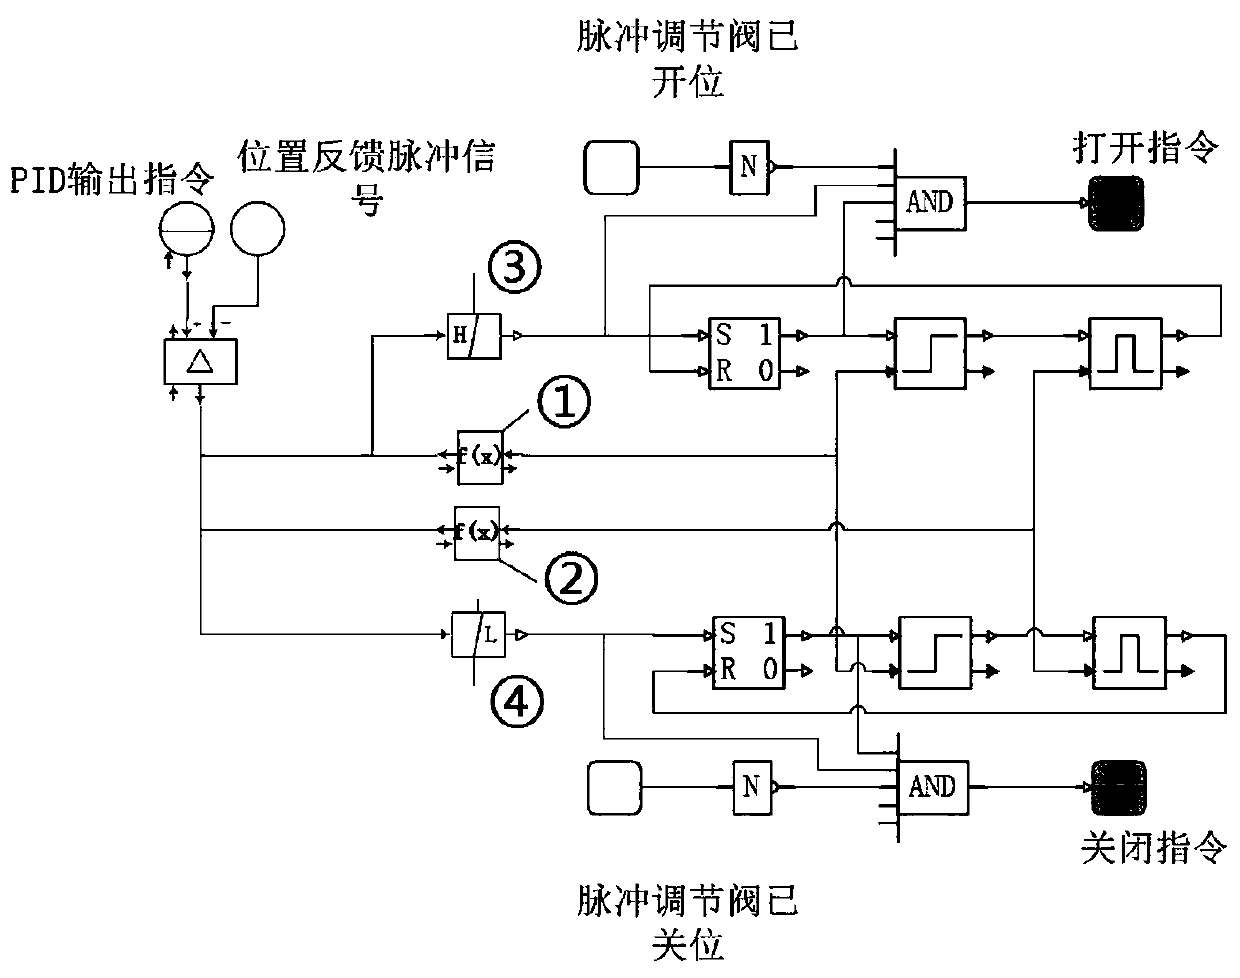 Multi-stage pulse control method for regulating valve in thermal power plant